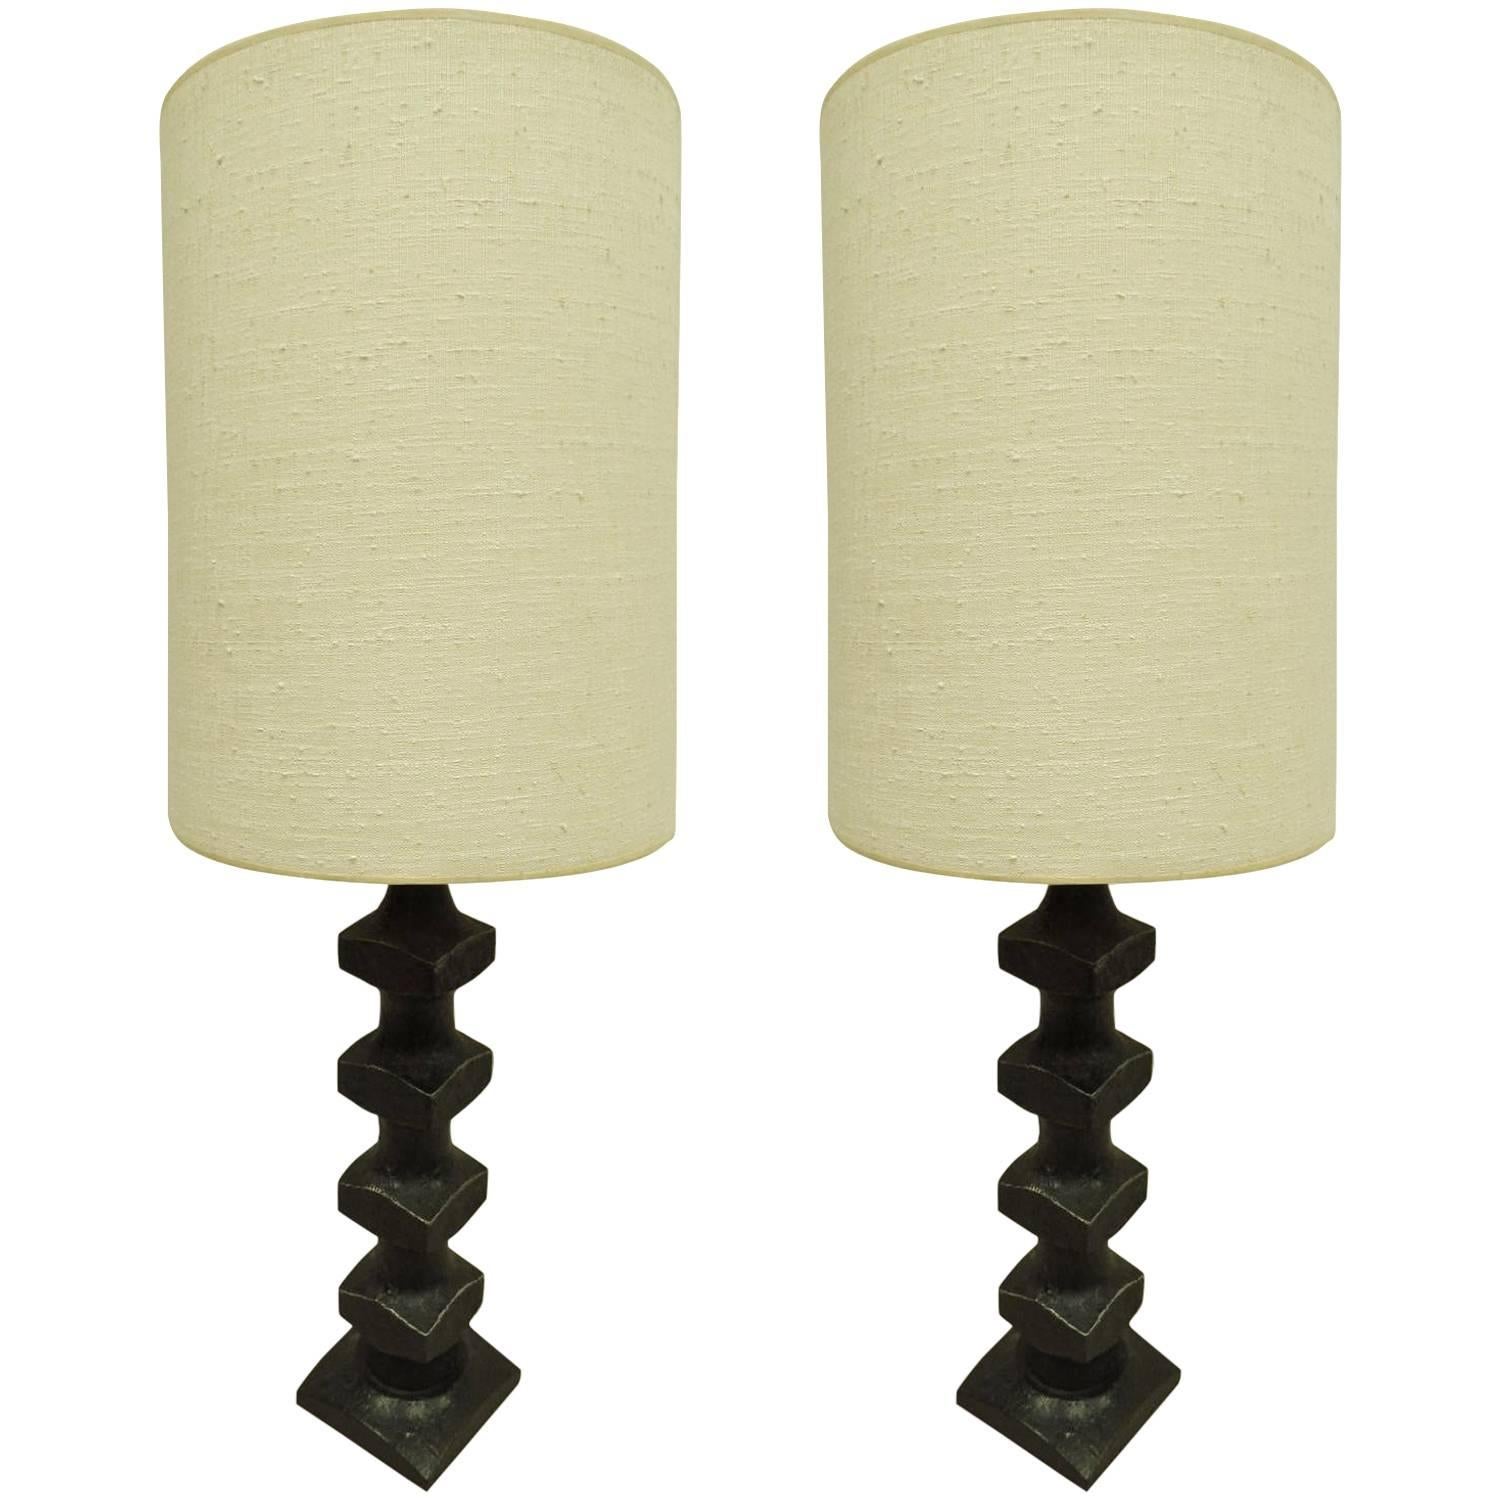 Pair of French Modern Craftsman 'Bronzed' Table Lamps, Giacometti